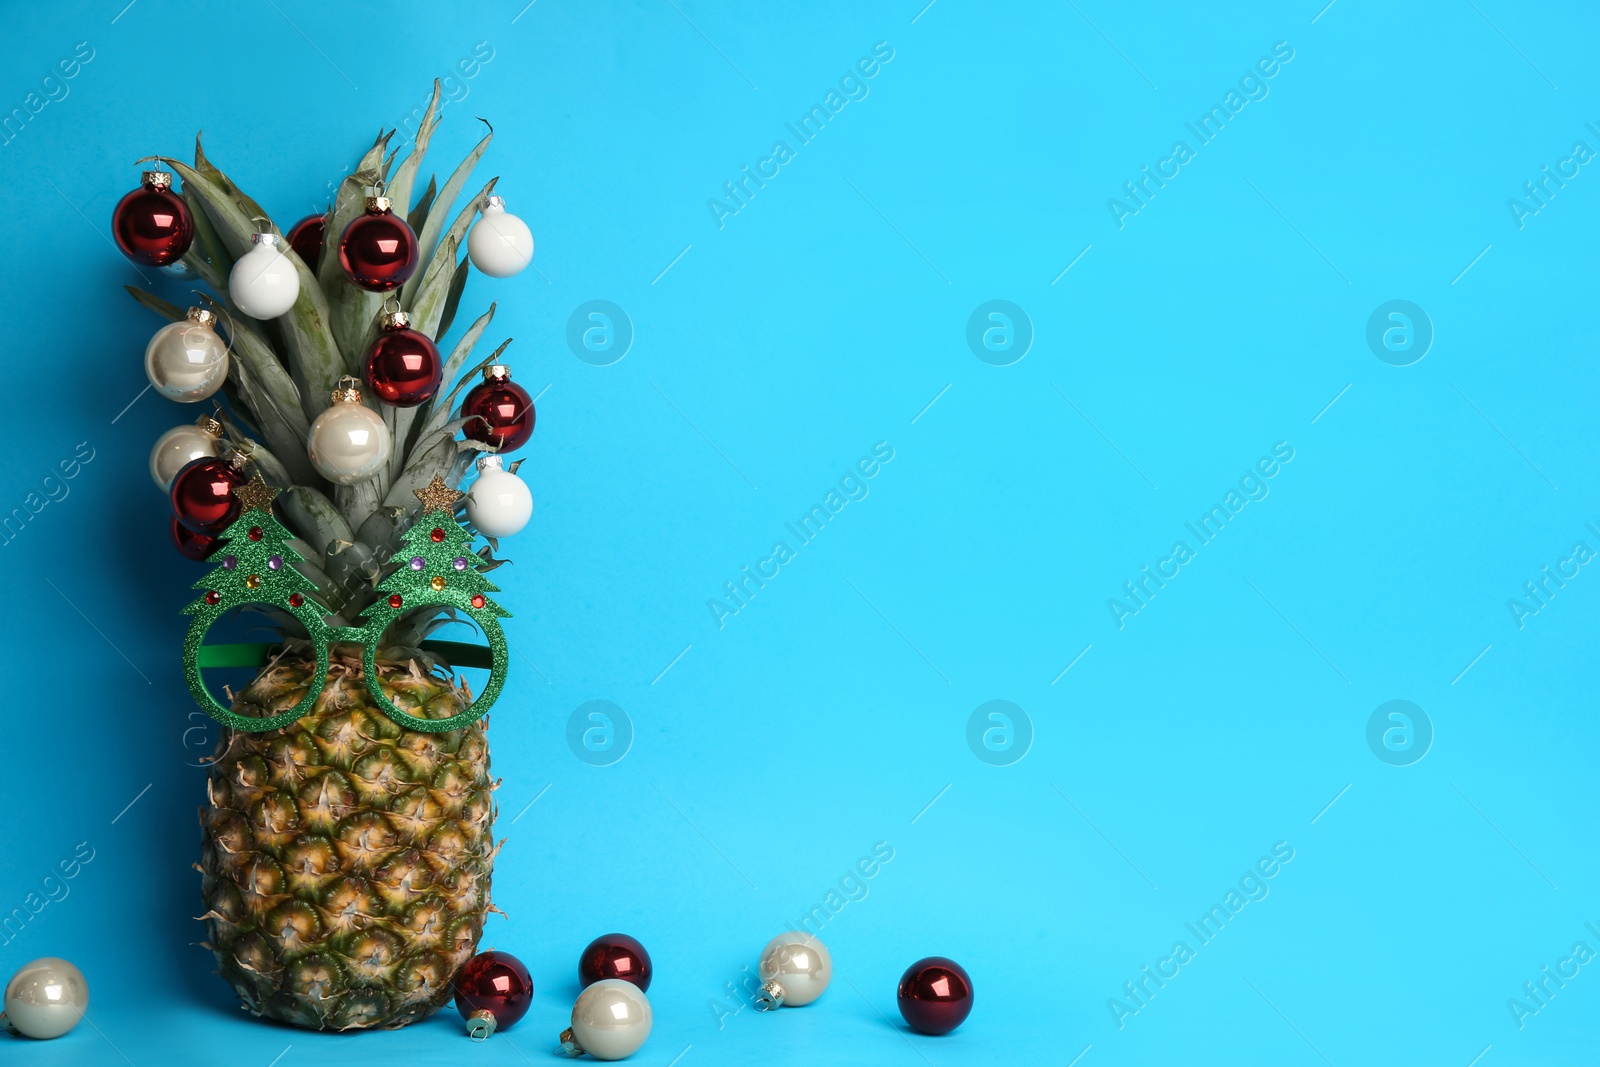 Photo of Pineapple with party glasses and Christmas tree balls on light blue background, space for text. Creative concept